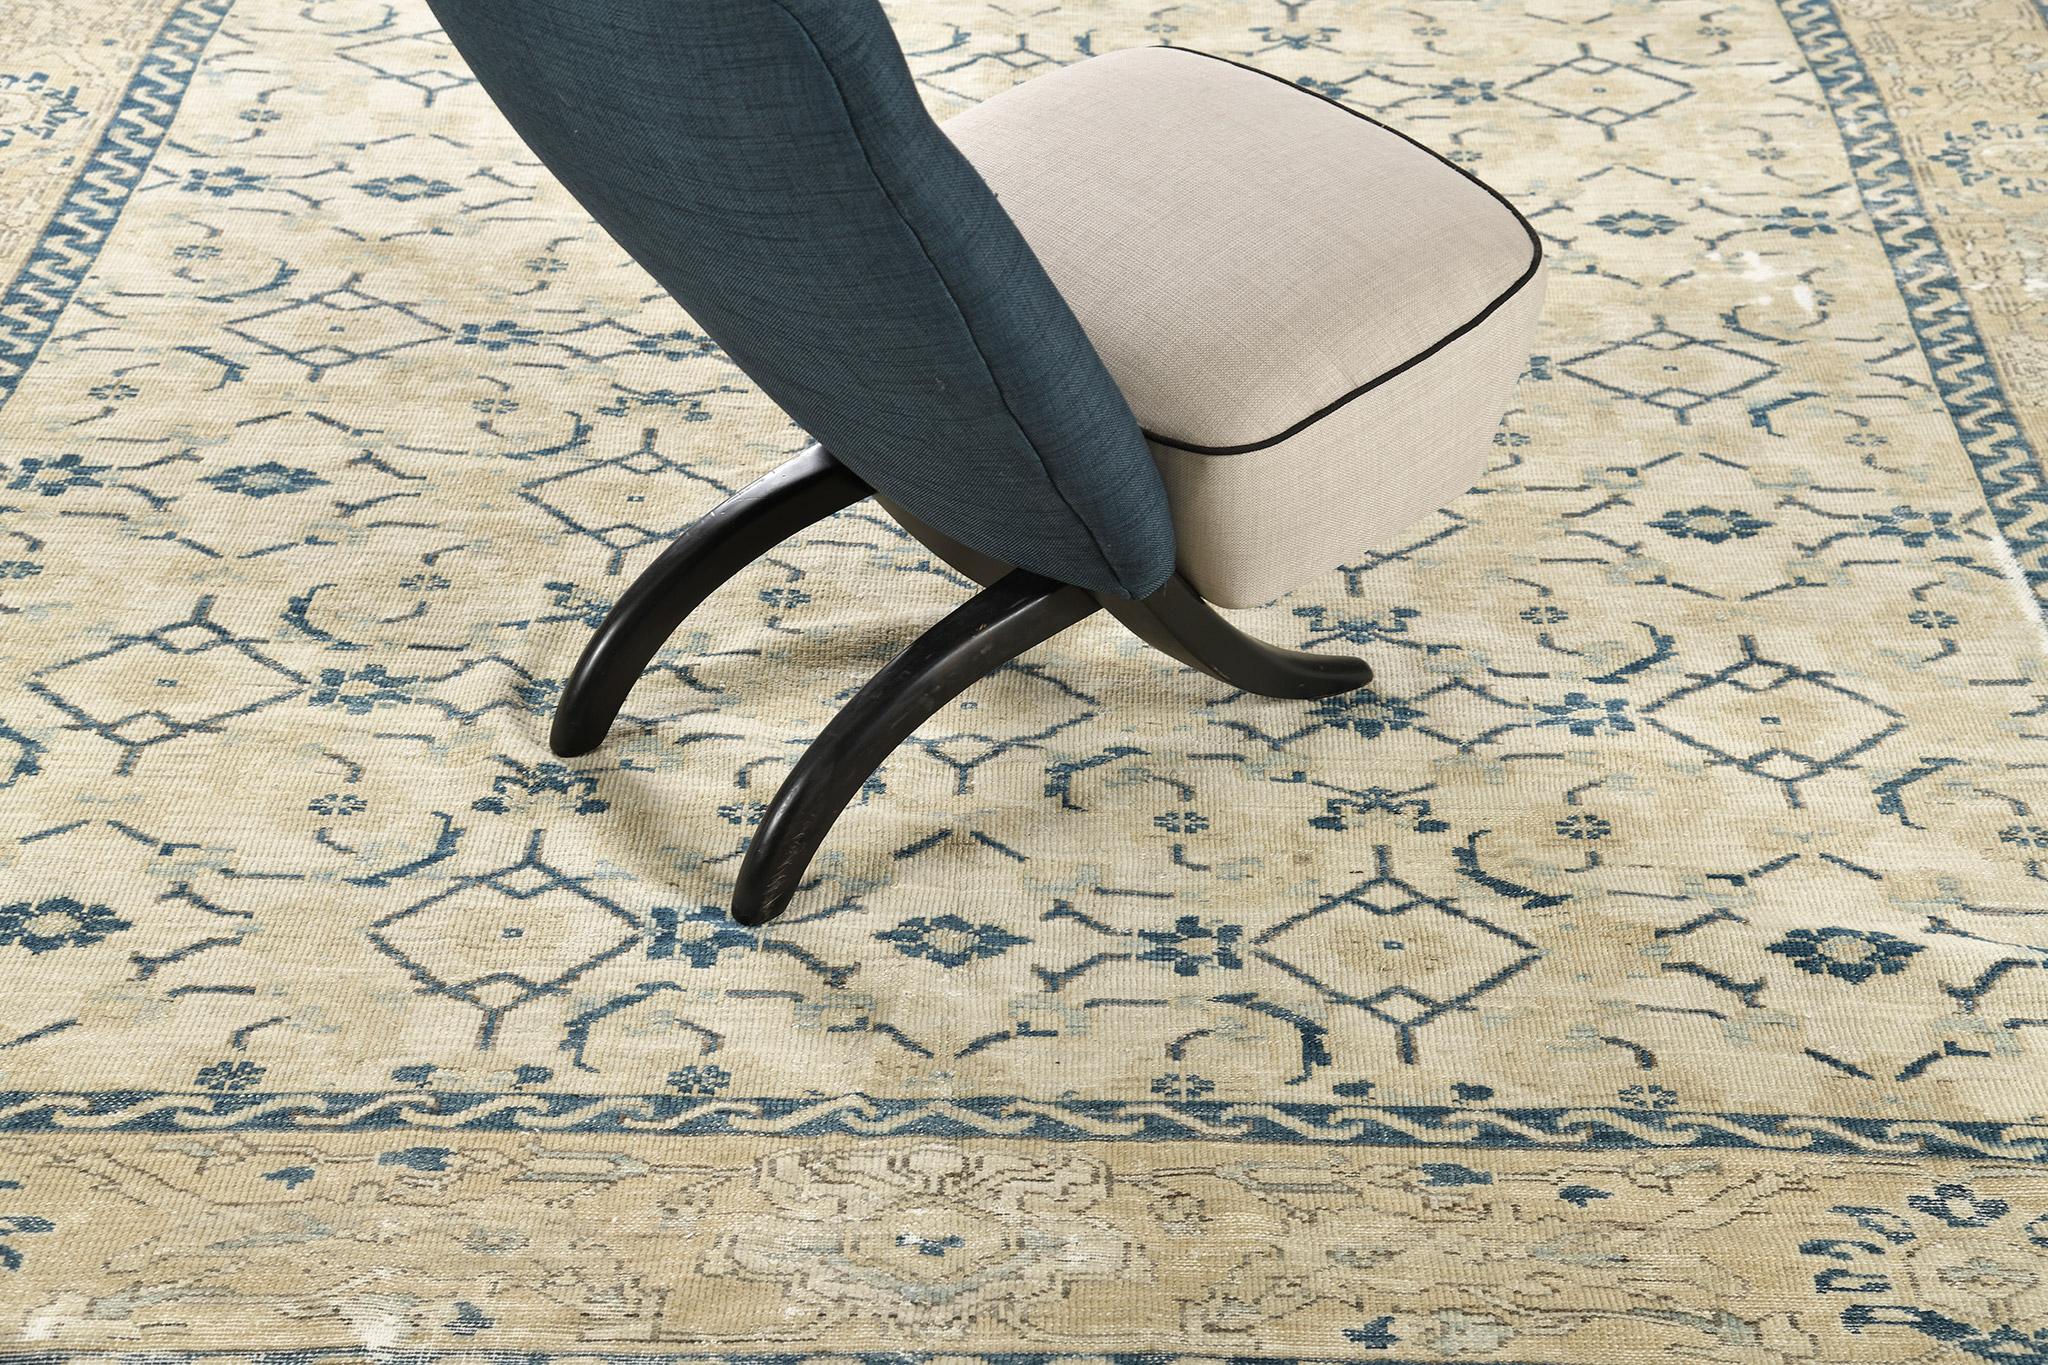 Othon’ in Domicile Collection features dainty botanical motifs running along gracefully in the khaki field. Highlighted with aegean blue accents, this rug is enclosed with a series of blooming palmettes and S motifs. A magnificent rug that would be